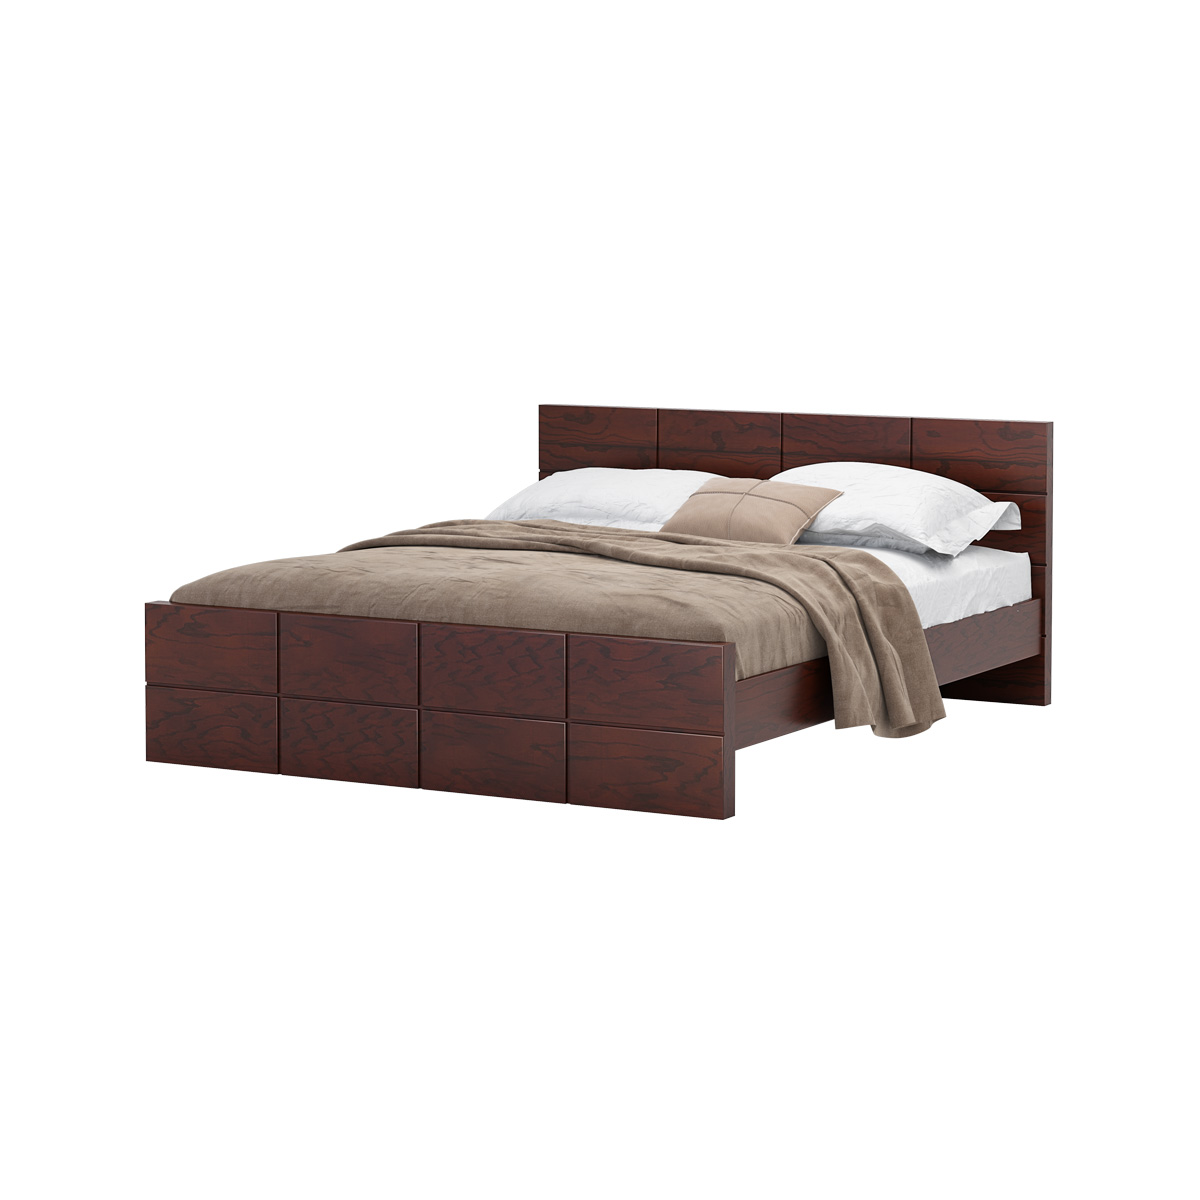 Wooden Double Bed | BDH-305-3-1-20